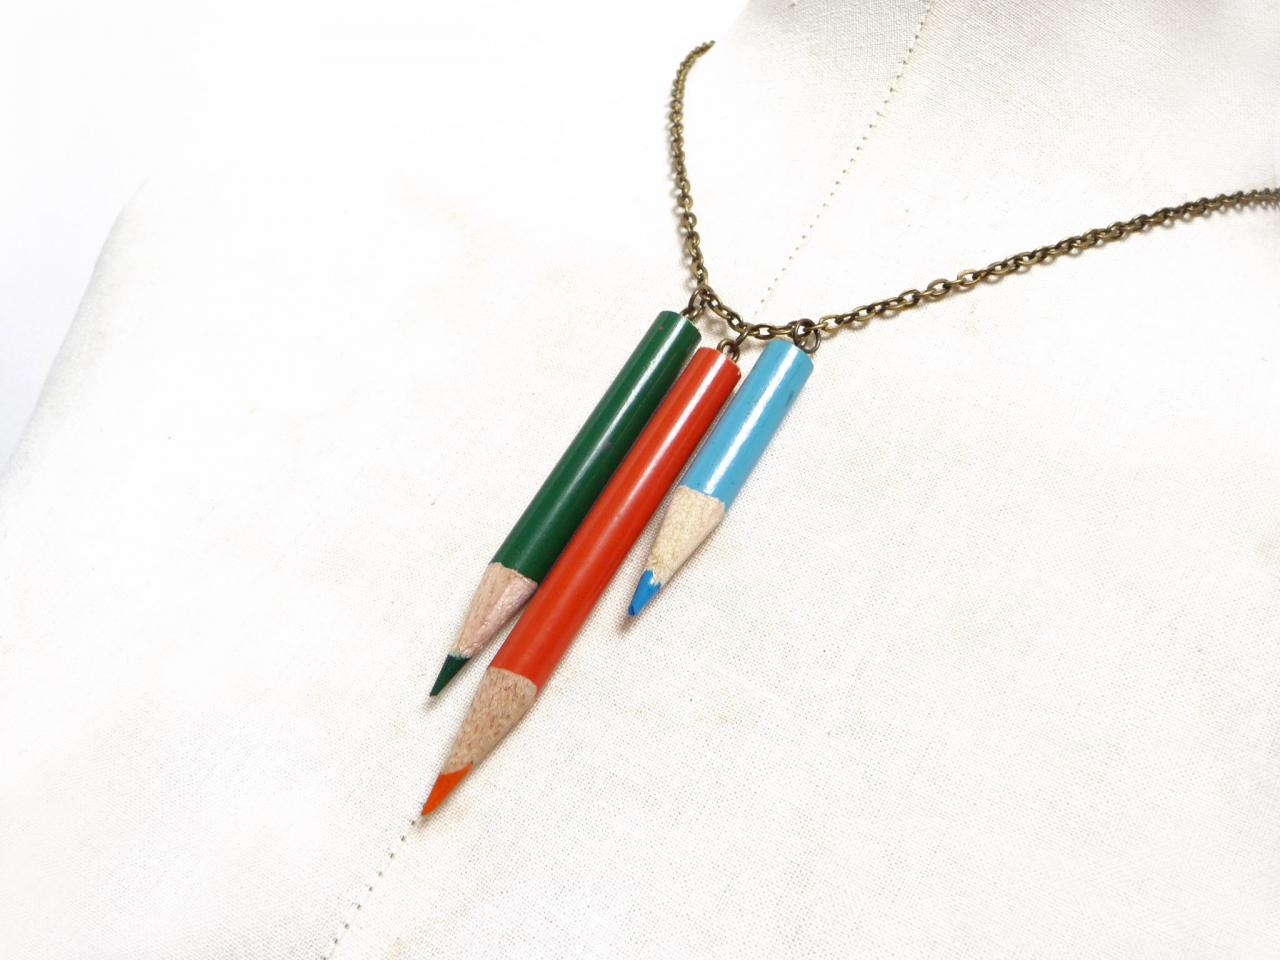 Teacher Gift Idea Color Pencil Necklace With Brass Chain - Green Orange Blue Crayons Charms - Back To School, Schoolmate, Upcycled Recycled